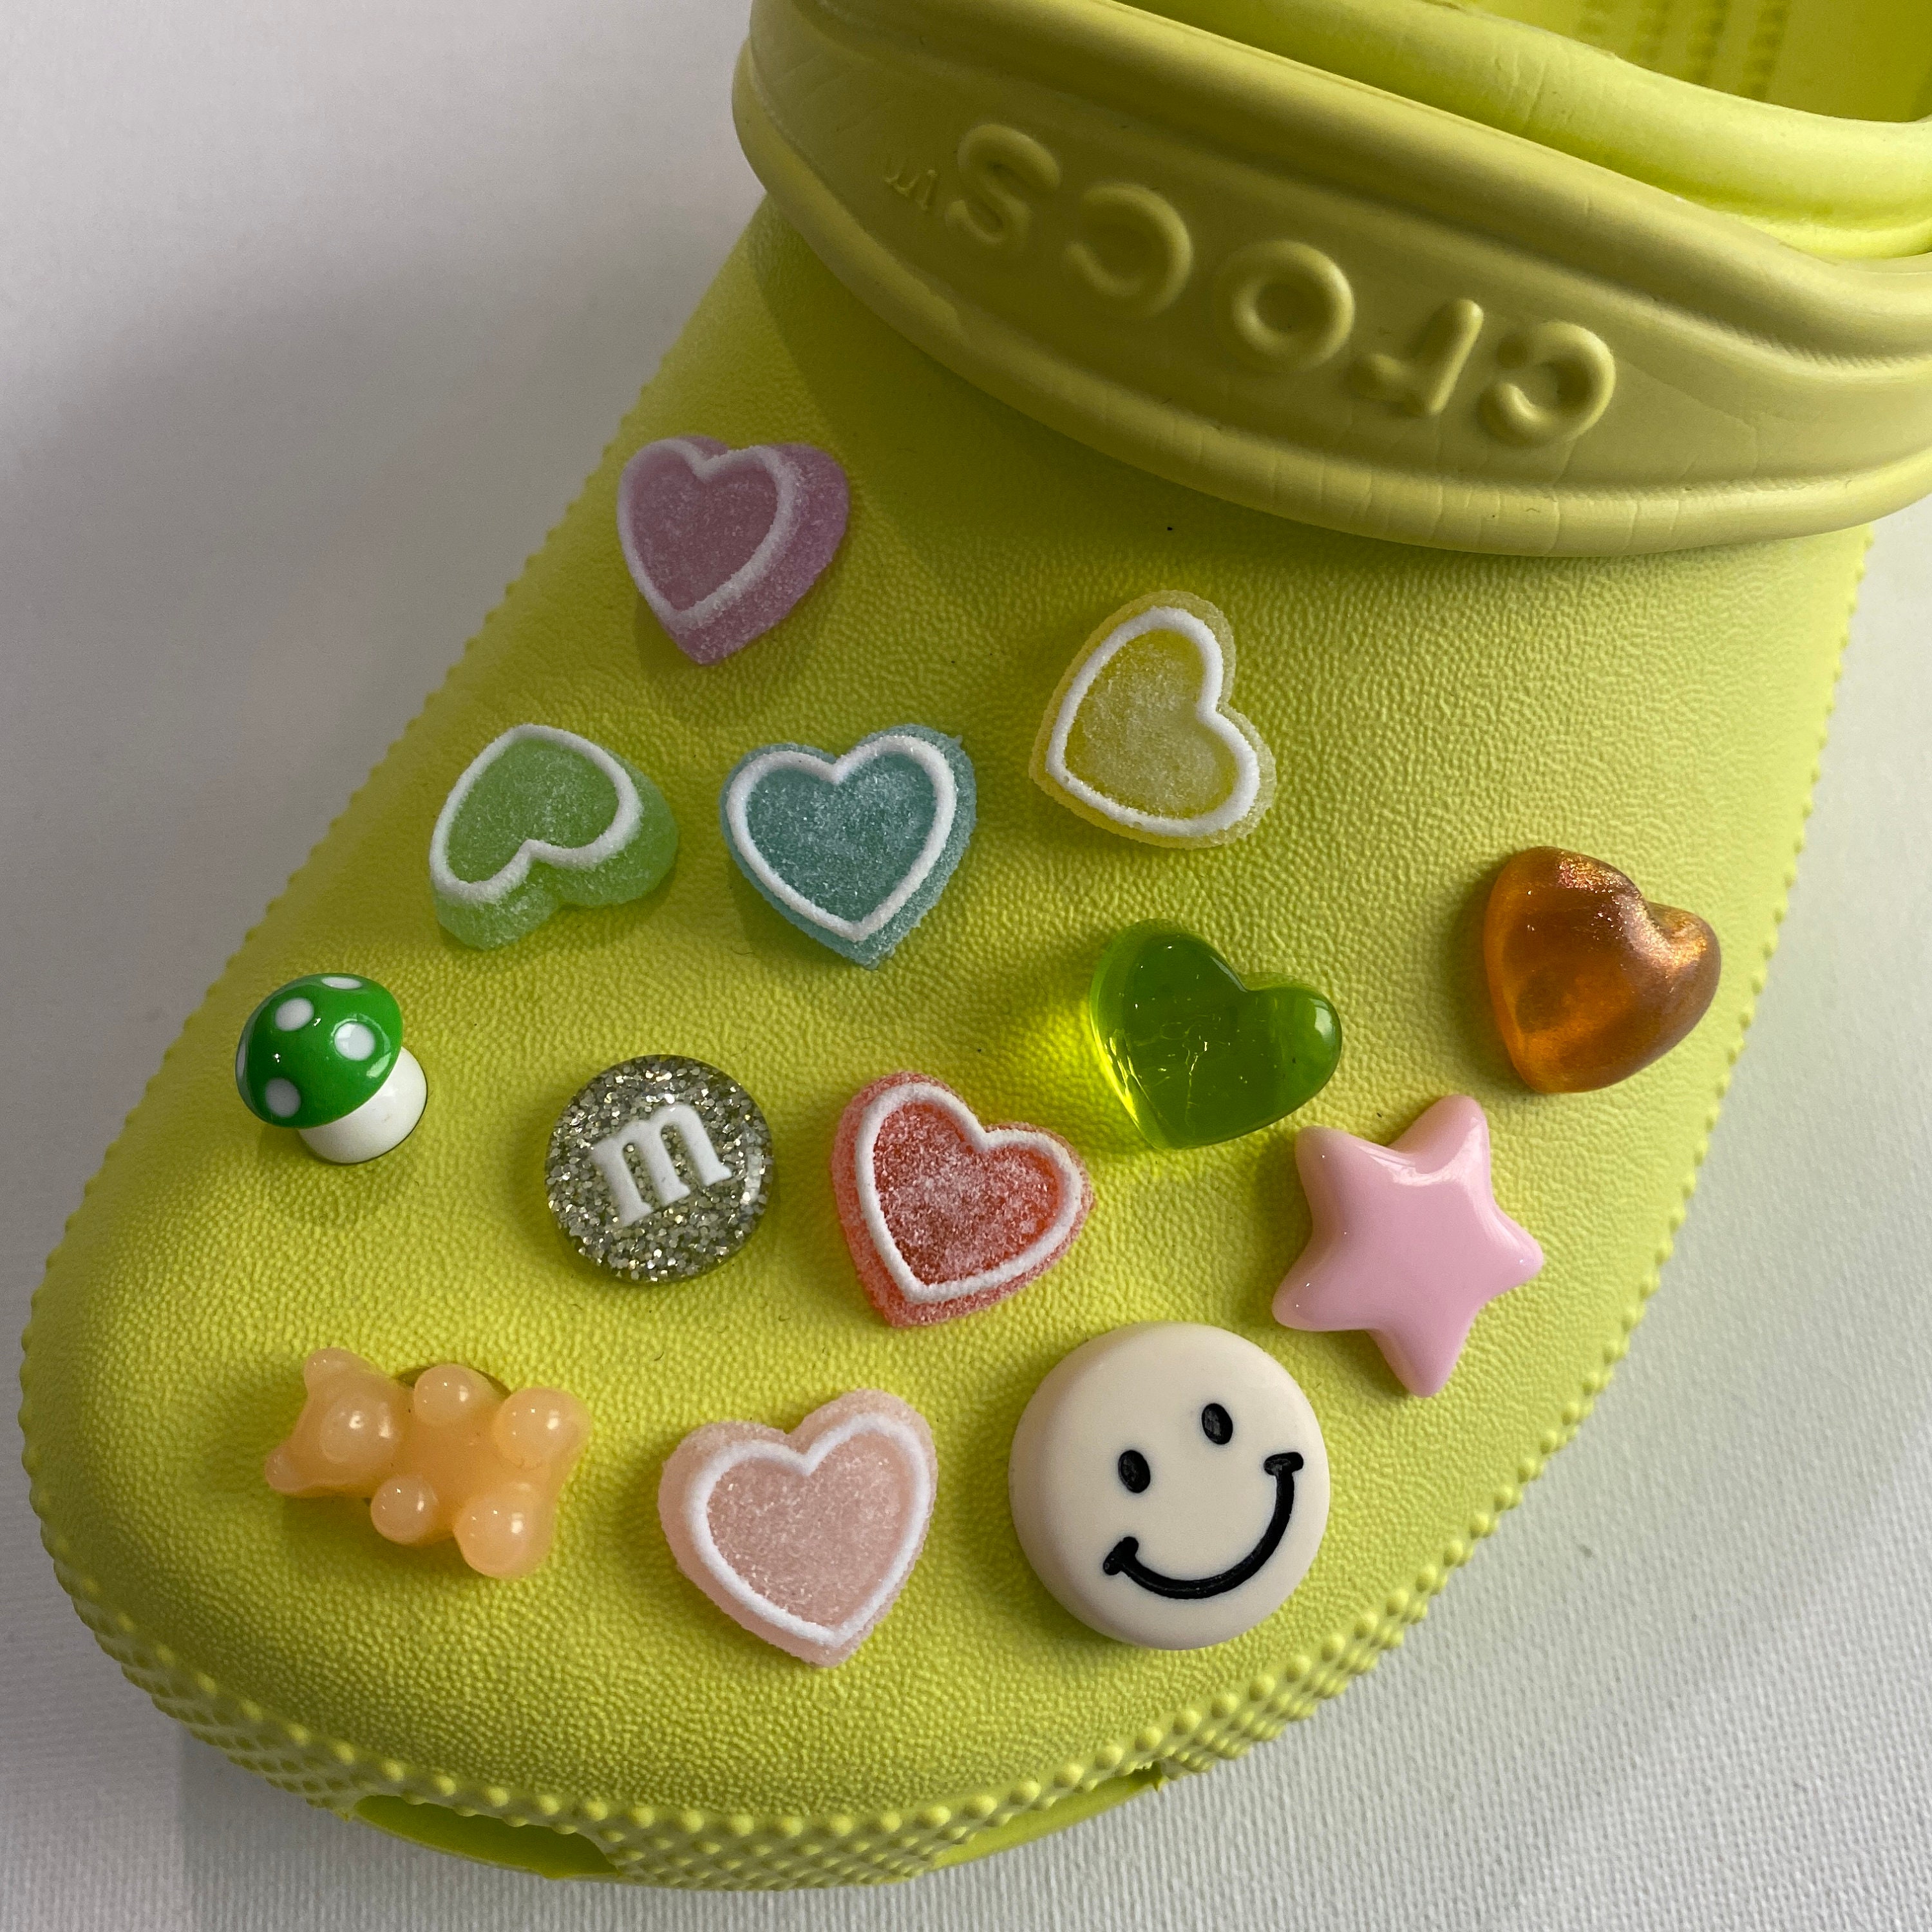 SWEETHEARTS Crocs JIBBITZ CHARMS 5 Pack hearts valentines day candy  valentine